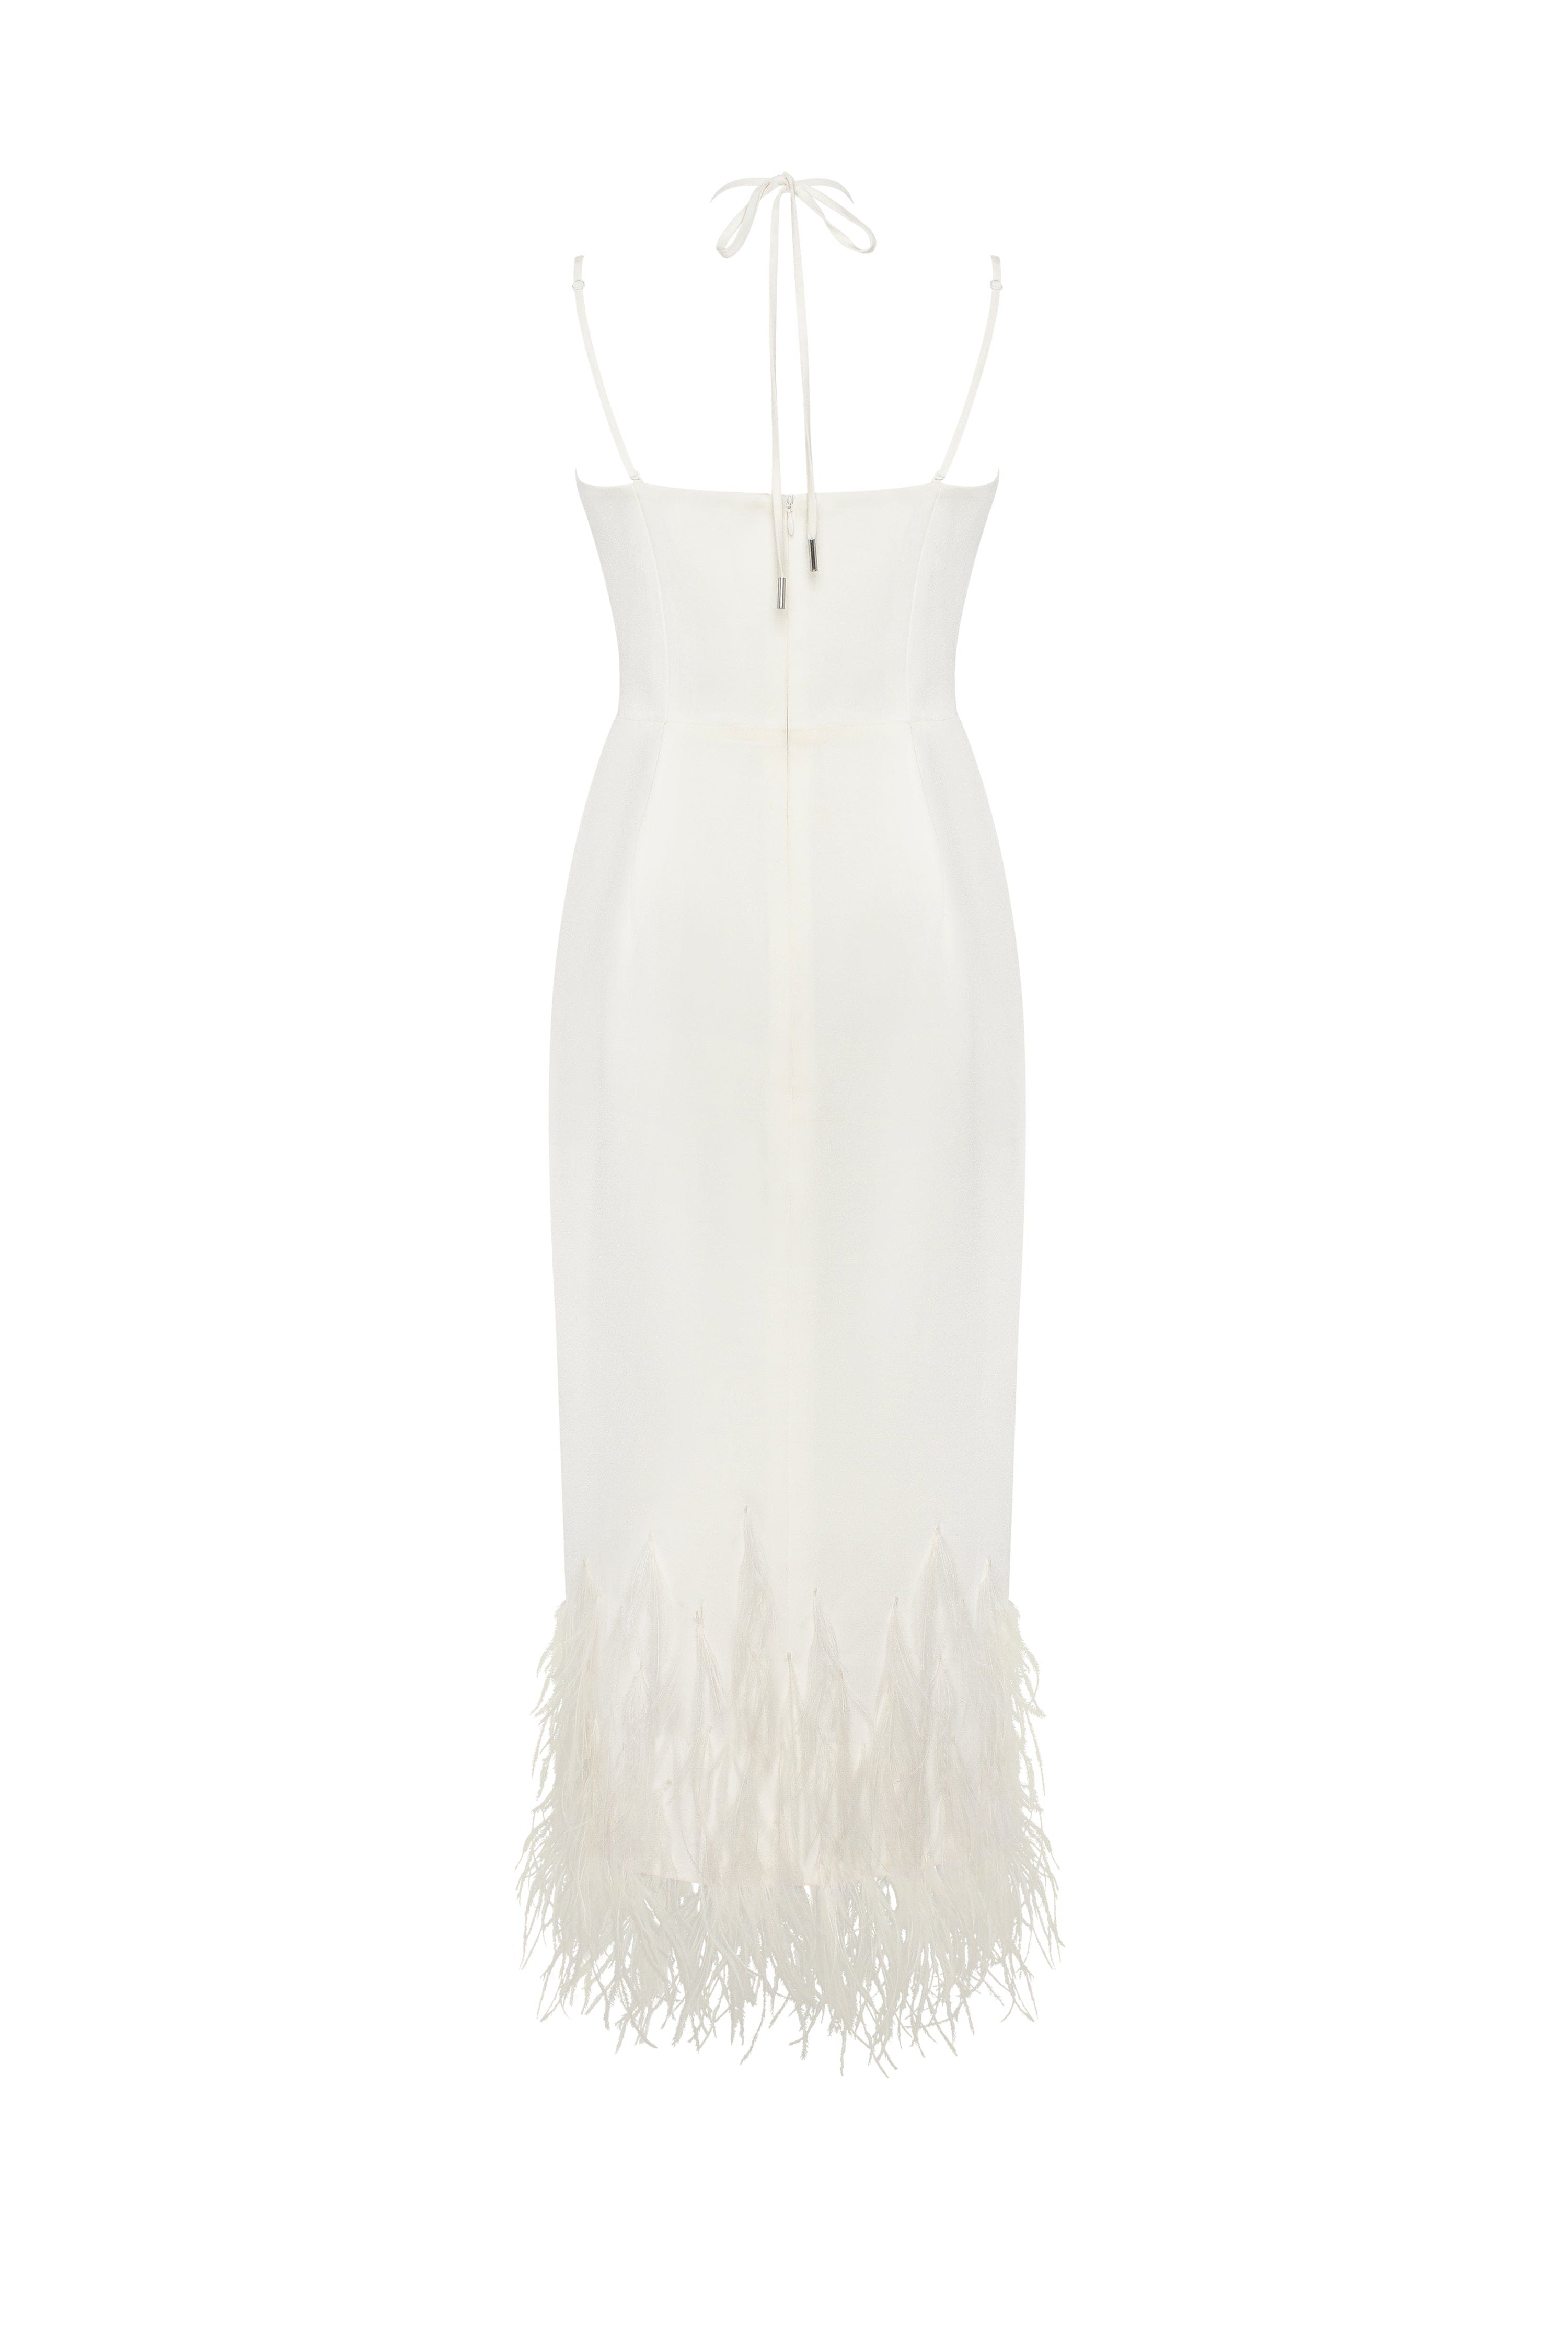 White cocktail dress decorated with feathers, Xo Xo